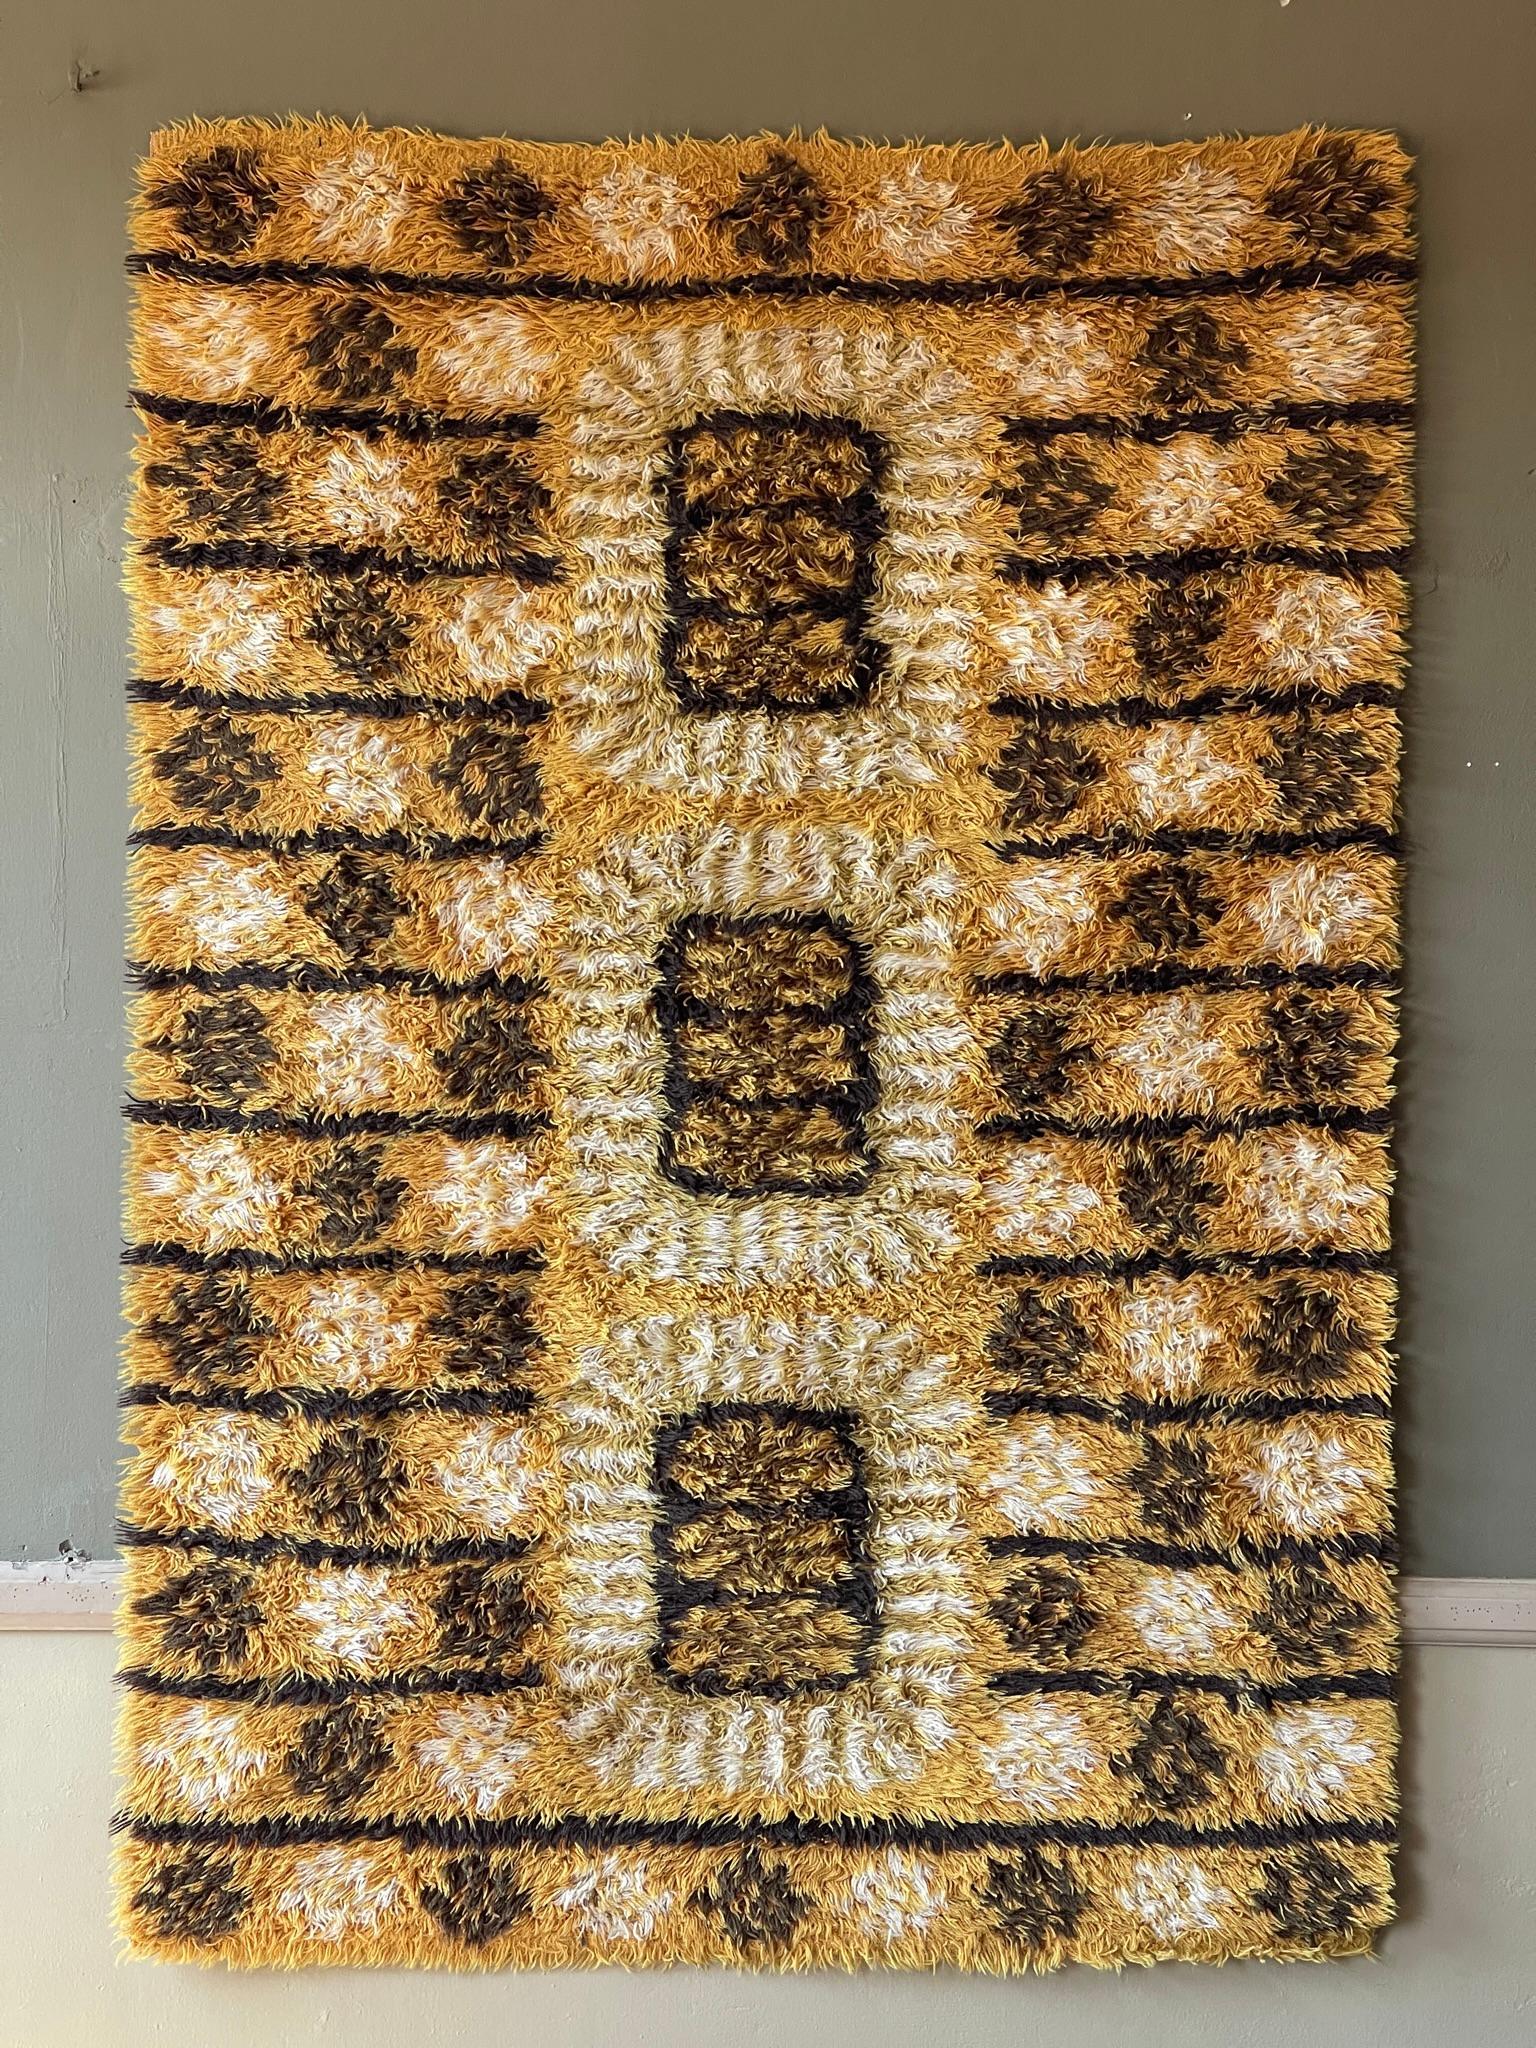 Woven 1960s Rya Rug from Sweden in Brown, Yellow and White Tones For Sale